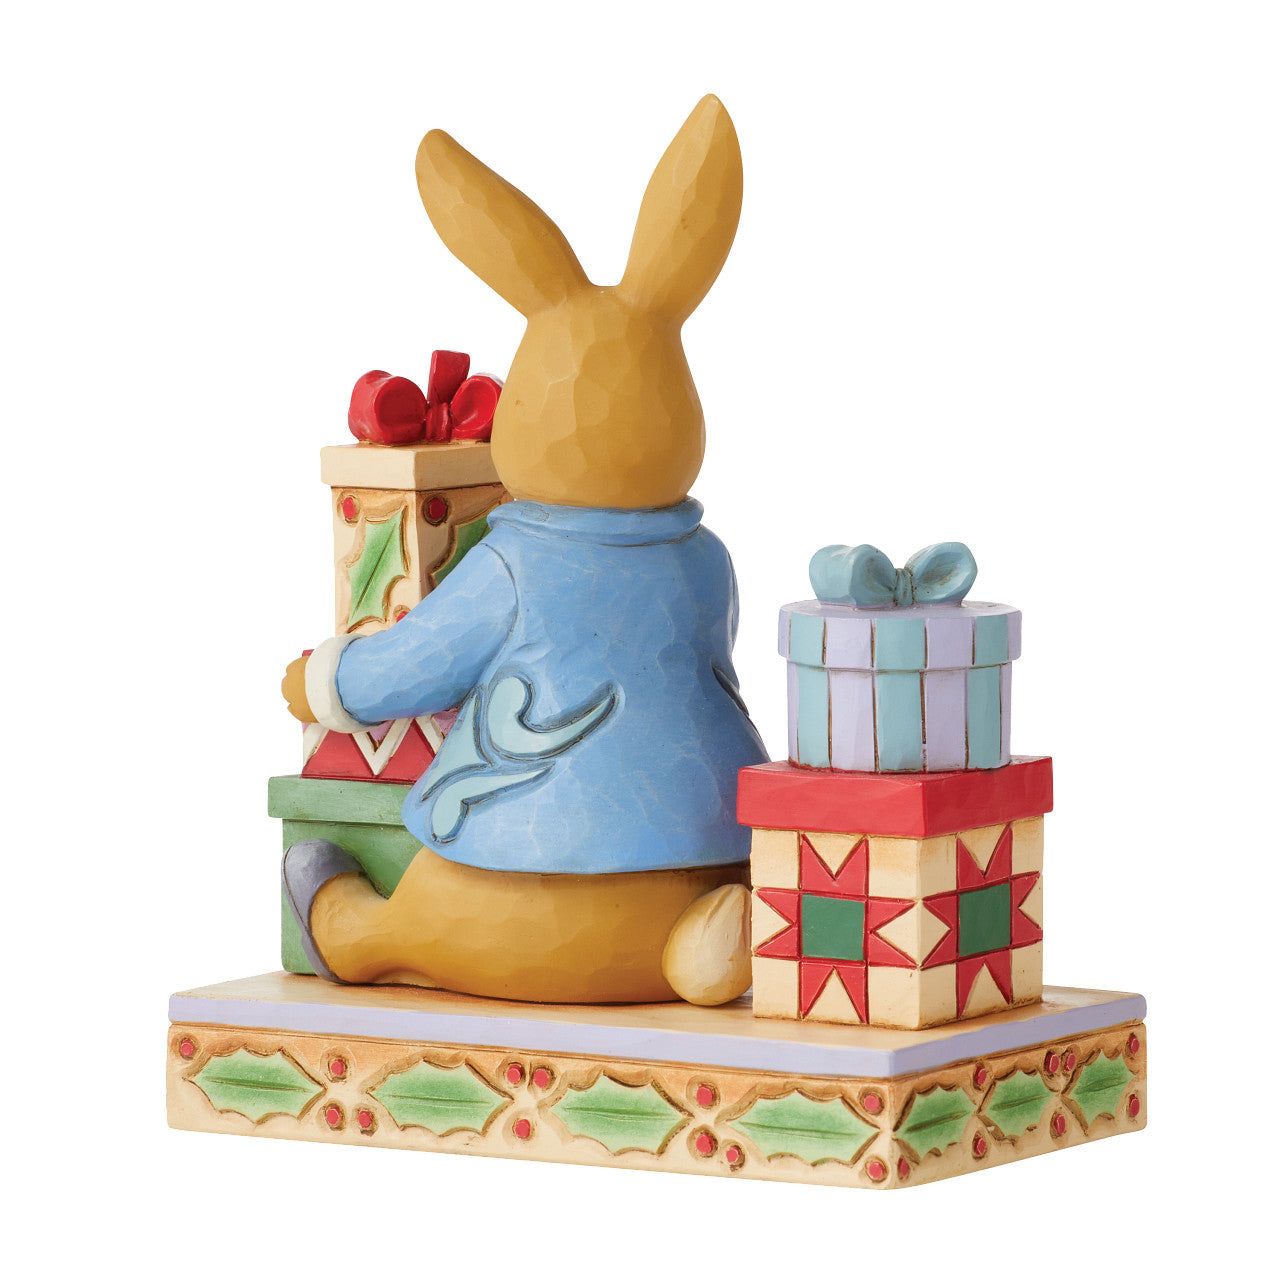 Peter Rabbit - Presents of Happiness, Joy and Love